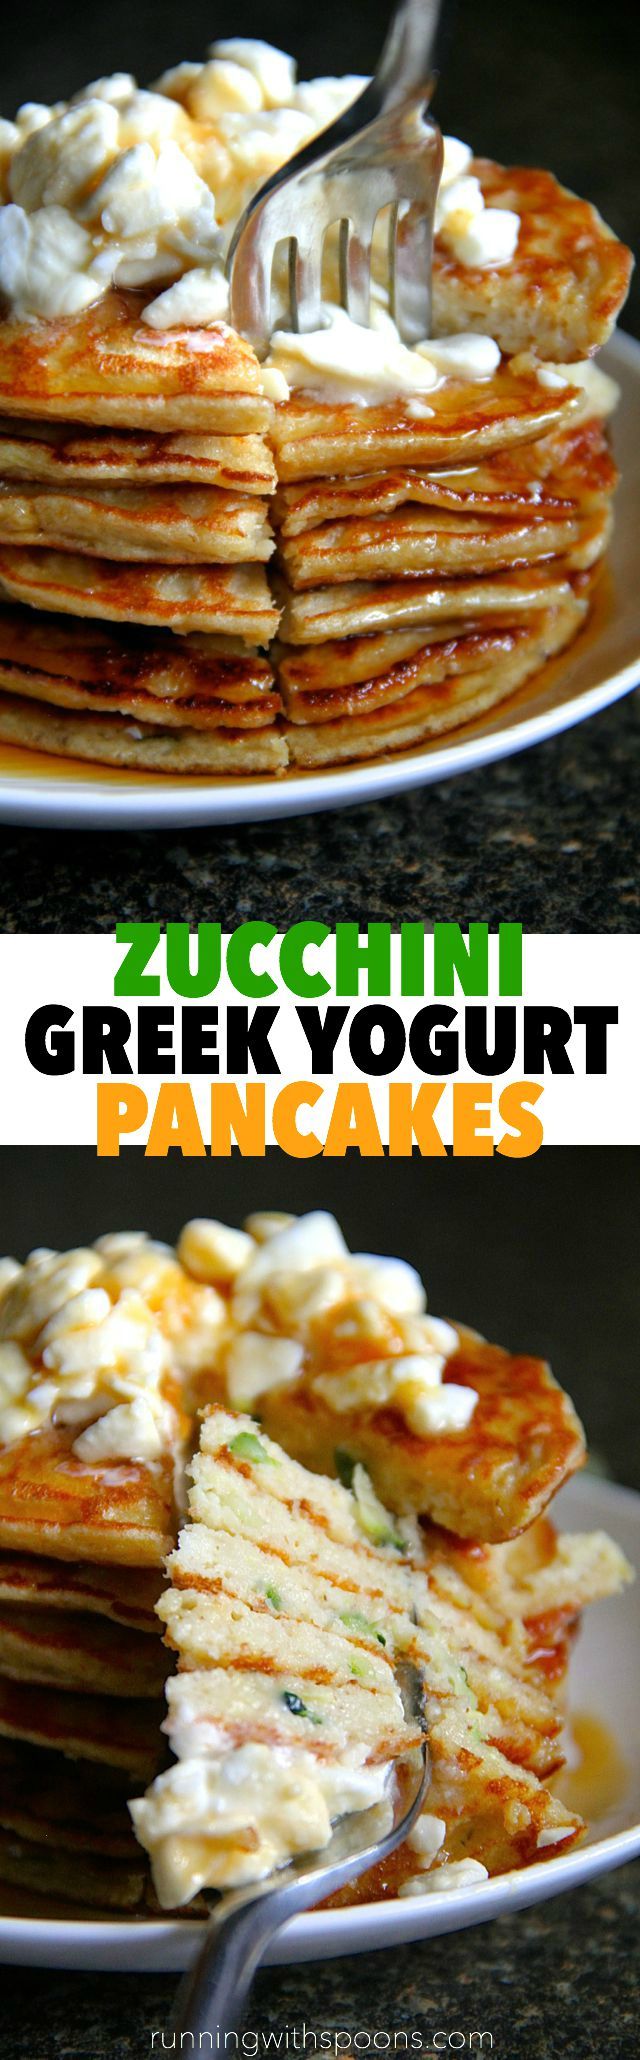 22 Healthy Breakfast Recipes That Fill You Up Without Gaining Weight